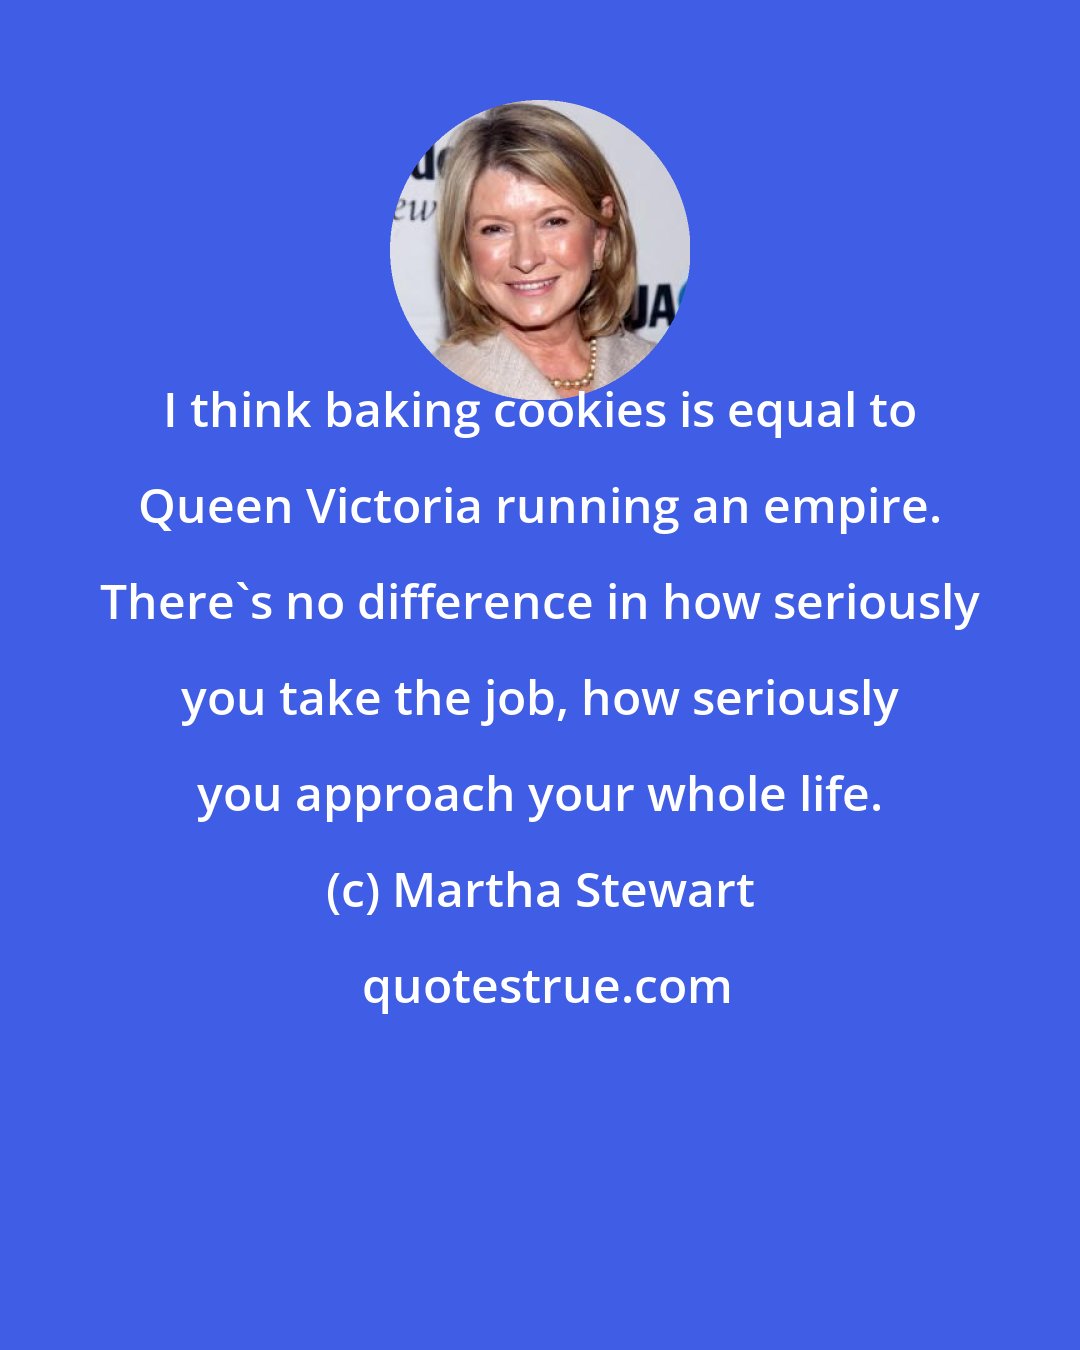 Martha Stewart: I think baking cookies is equal to Queen Victoria running an empire. There's no difference in how seriously you take the job, how seriously you approach your whole life.